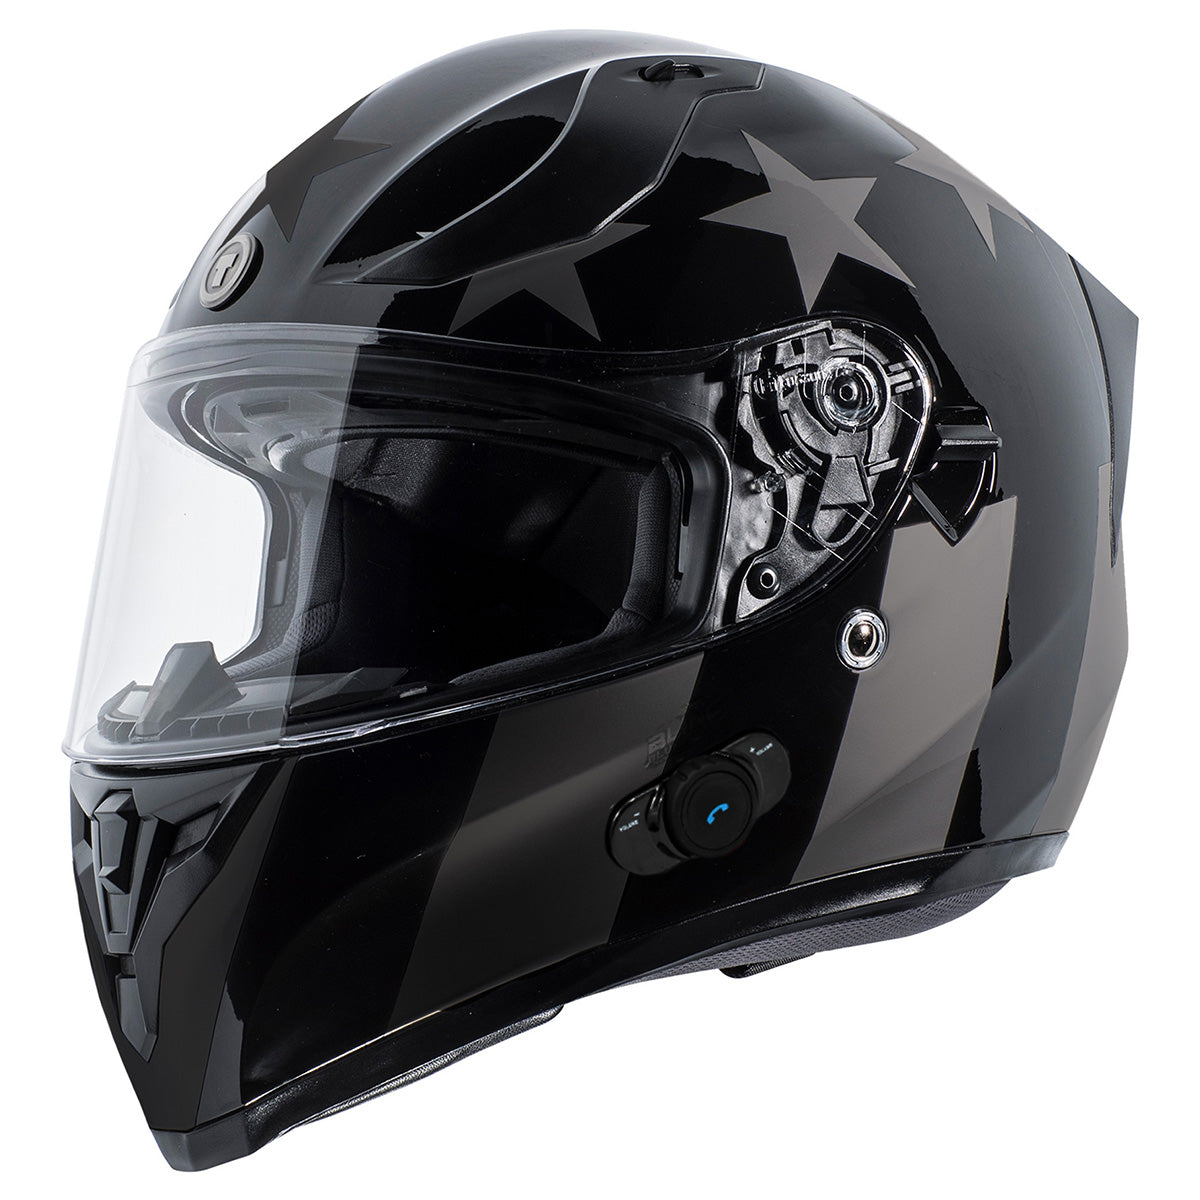 Torc T15B Bluetooth Motorcycle Helmet - Gloss Black Captain Shadow -  X-Large (Blemished)